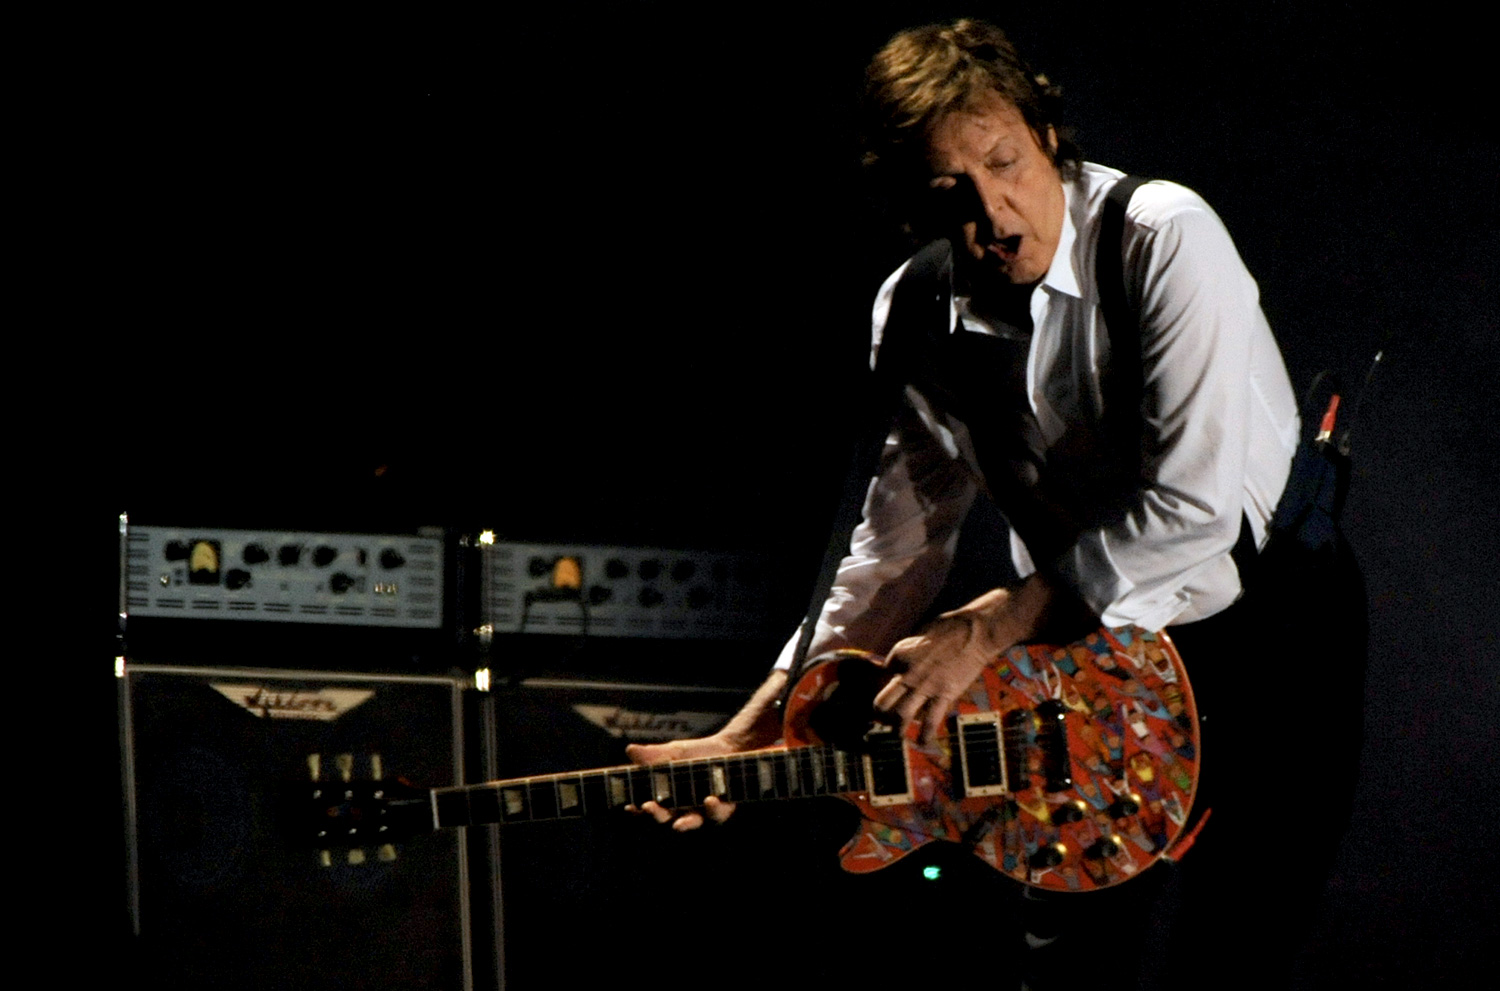 Paul McCartney performs on the Main Stage on Day 1 of the Coachella Music Festival in Indio, Ca